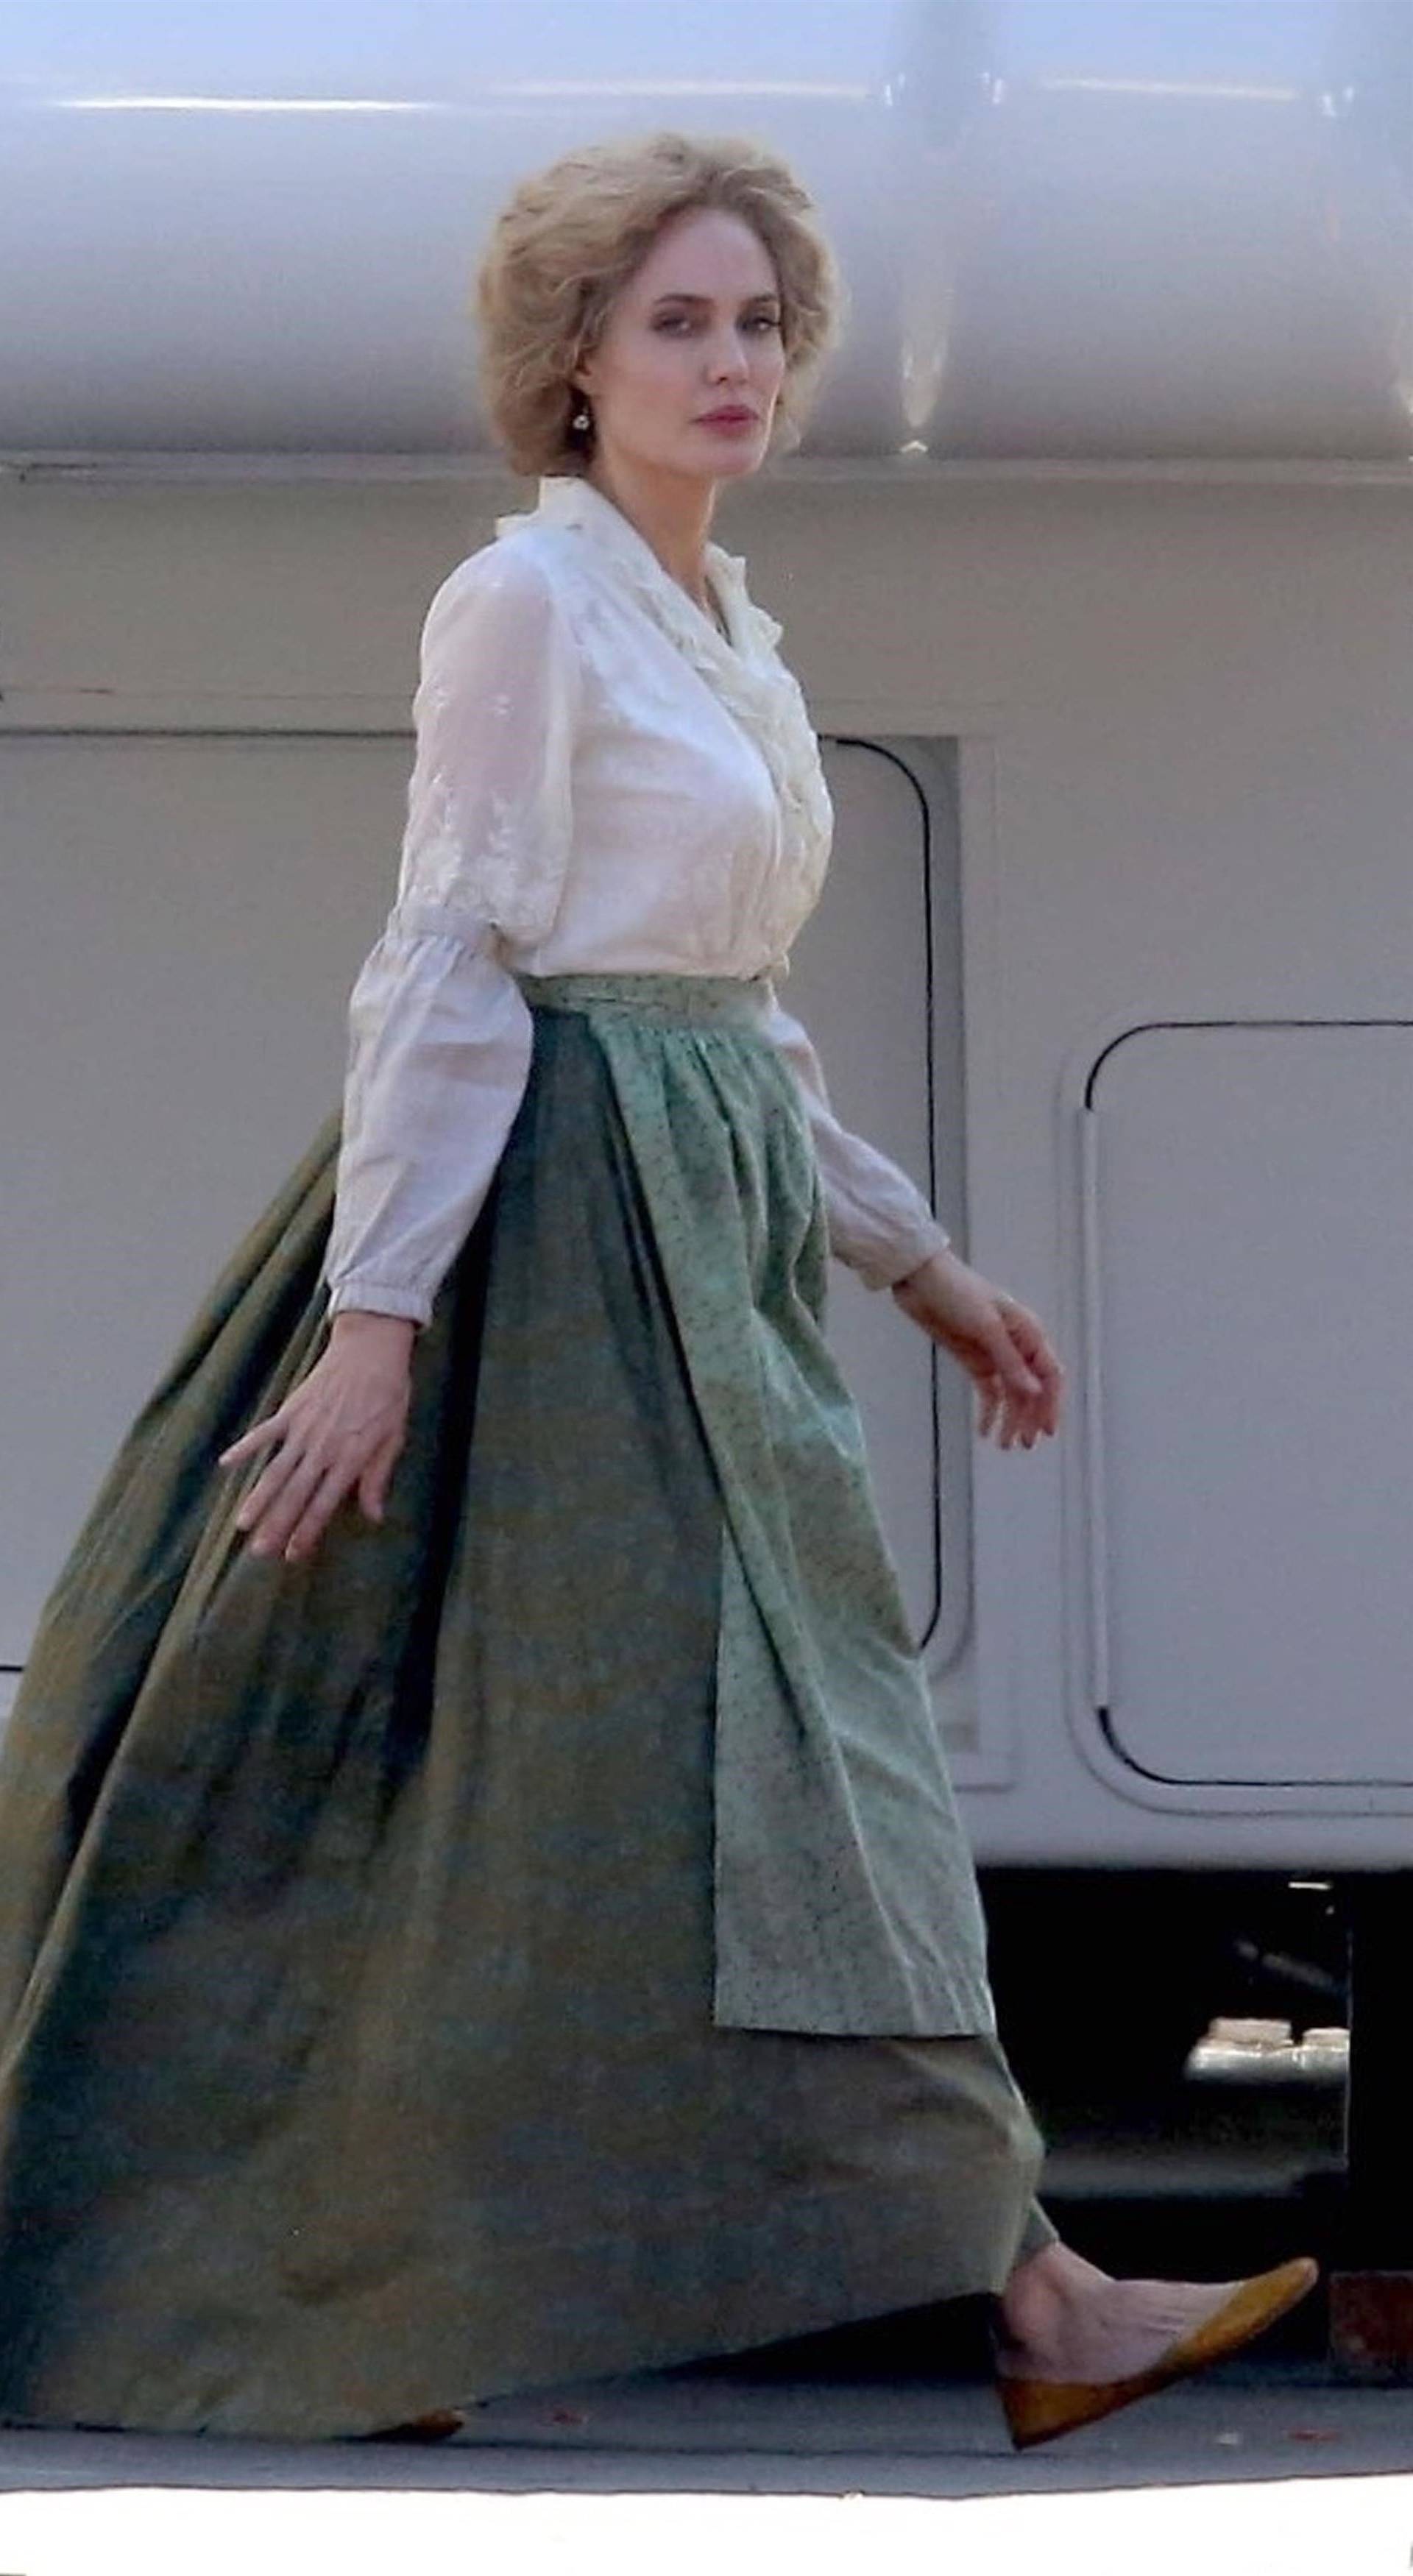 *PREMIUM-EXCLUSIVE* Angelina Jolie sports a big blonde wig as she is spotted for the first time on the set of her new film 'Come Away' in Hollywood **STRICT WEB EMBARGO UNTIL 8:00 AM PT on September 2